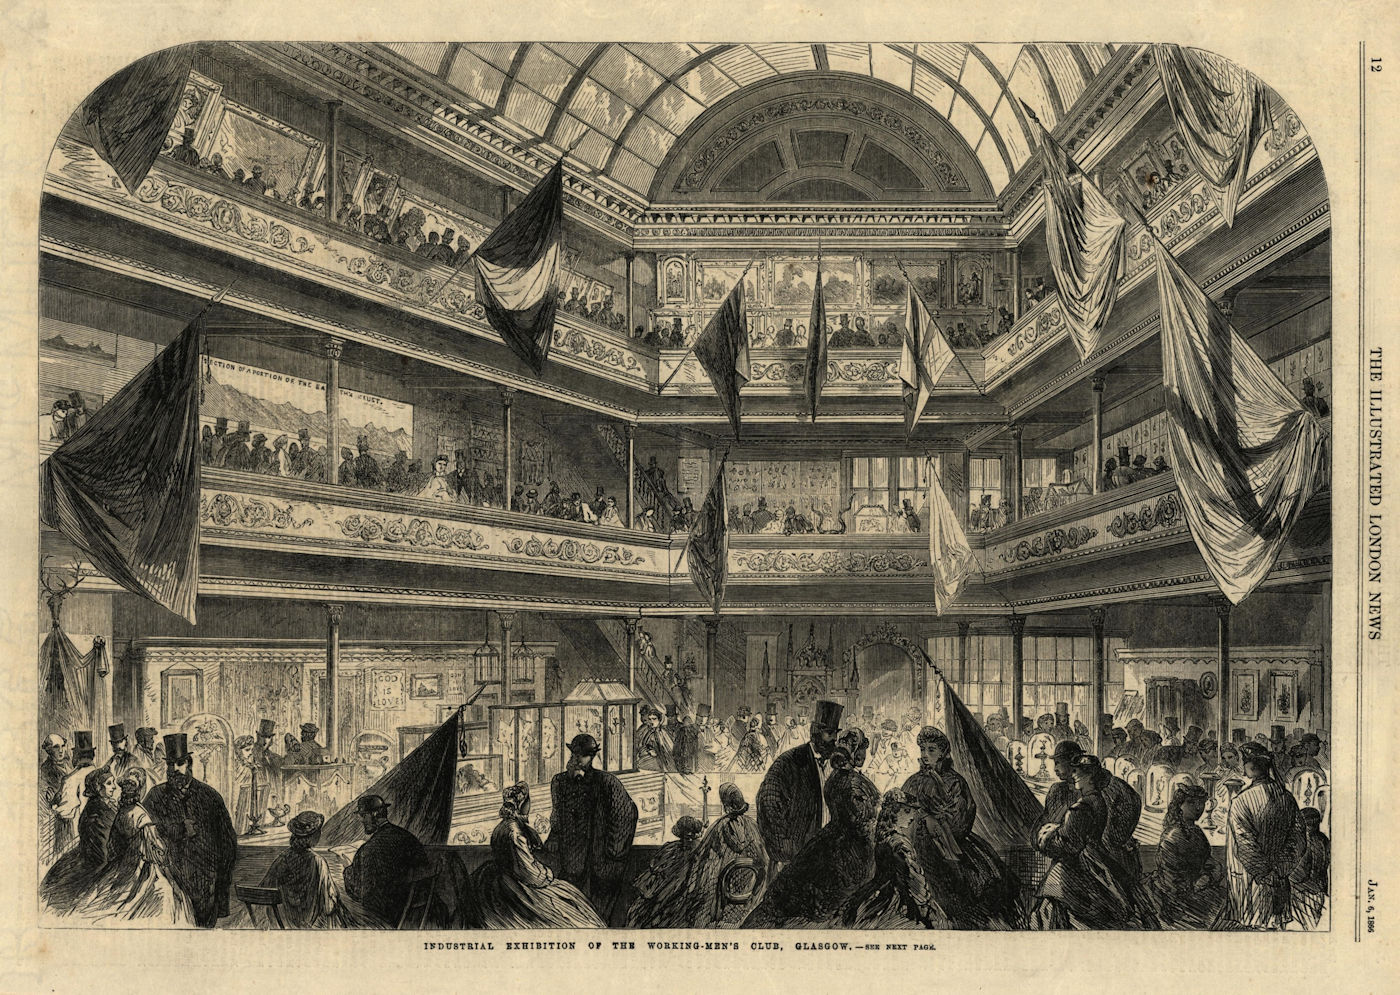 Associate Product Industrial Exhibition of The Working-Men's Club, Glasgow. Scotland 1866